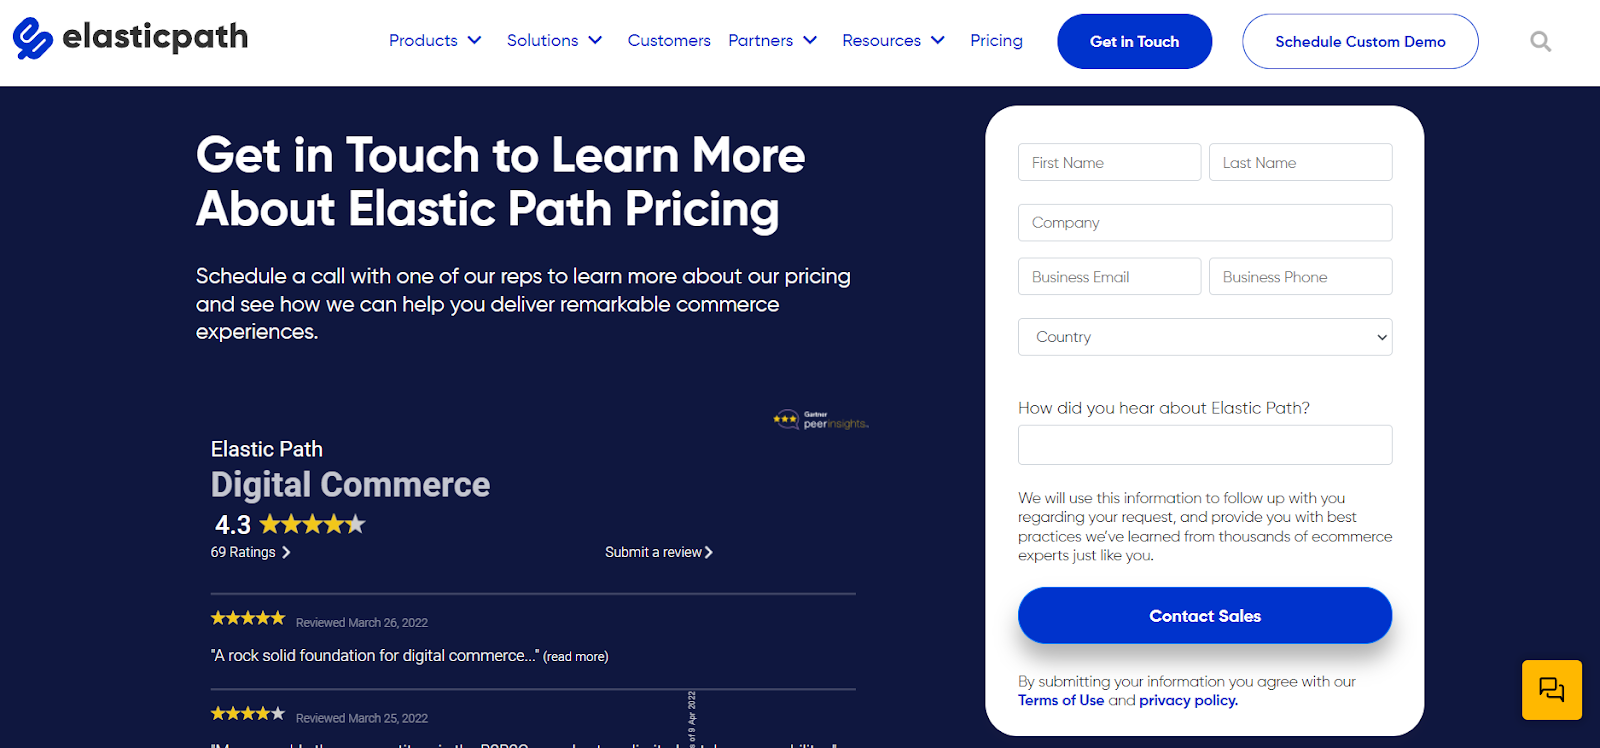 Contact us form for elastic path headless commerce services